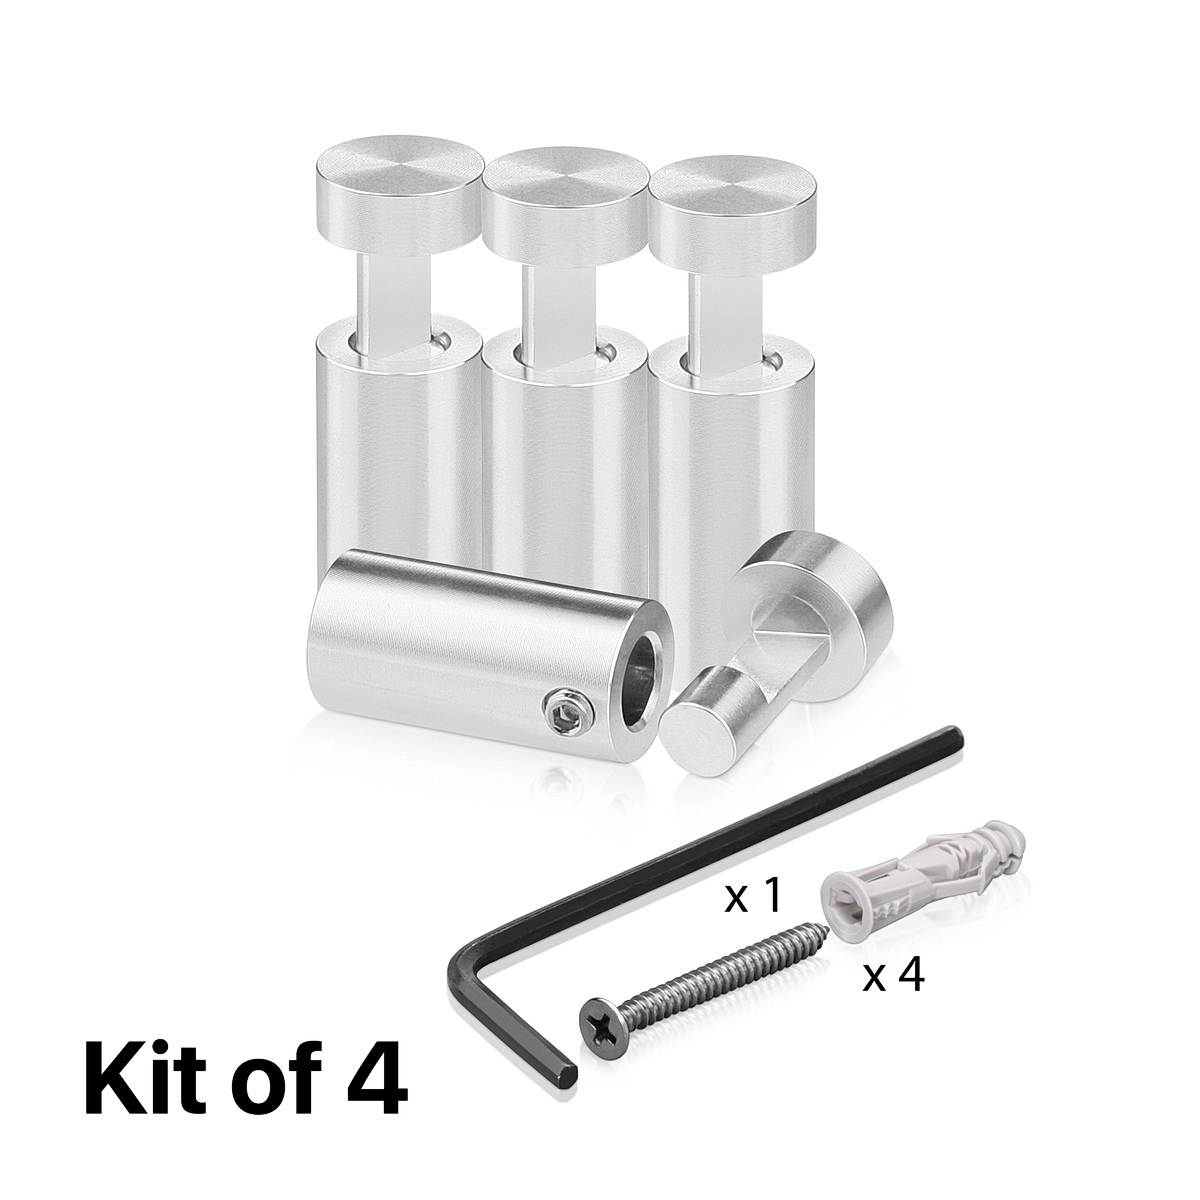 (Set of 4) 1/2'' Diameter X 1'' Barrel Length, Aluminum Clear Shiny Anodized Finish. Adjustable Edge Grip Standoff with (4) 2208Z Screw and (4) LANC1 Anchor  for concrete/drywall (For Inside Use Only)